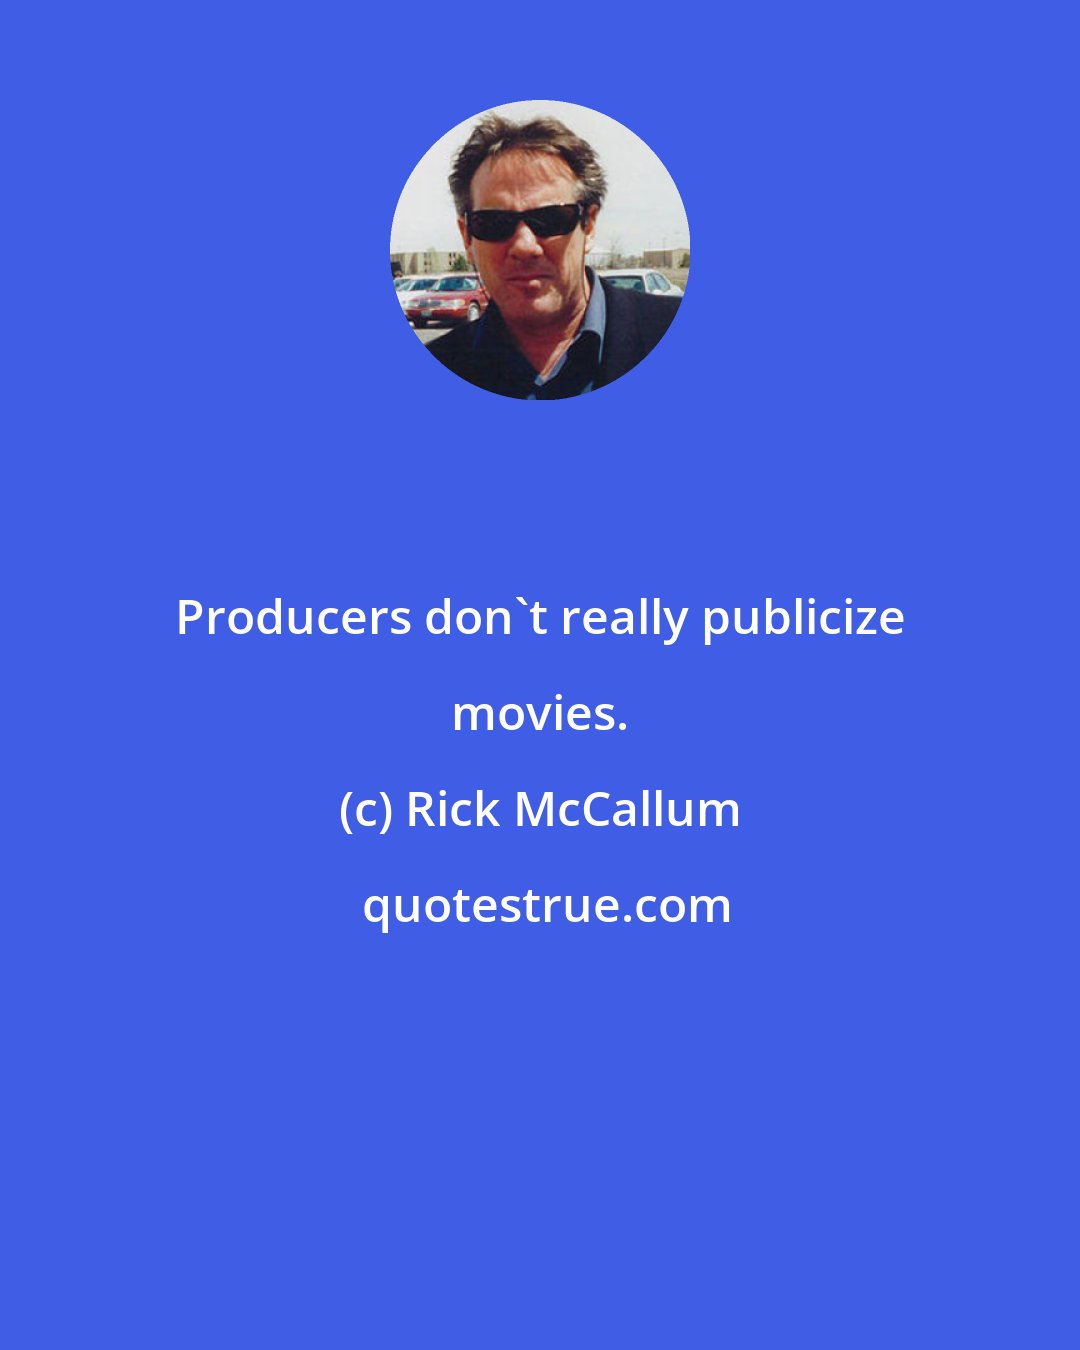 Rick McCallum: Producers don't really publicize movies.